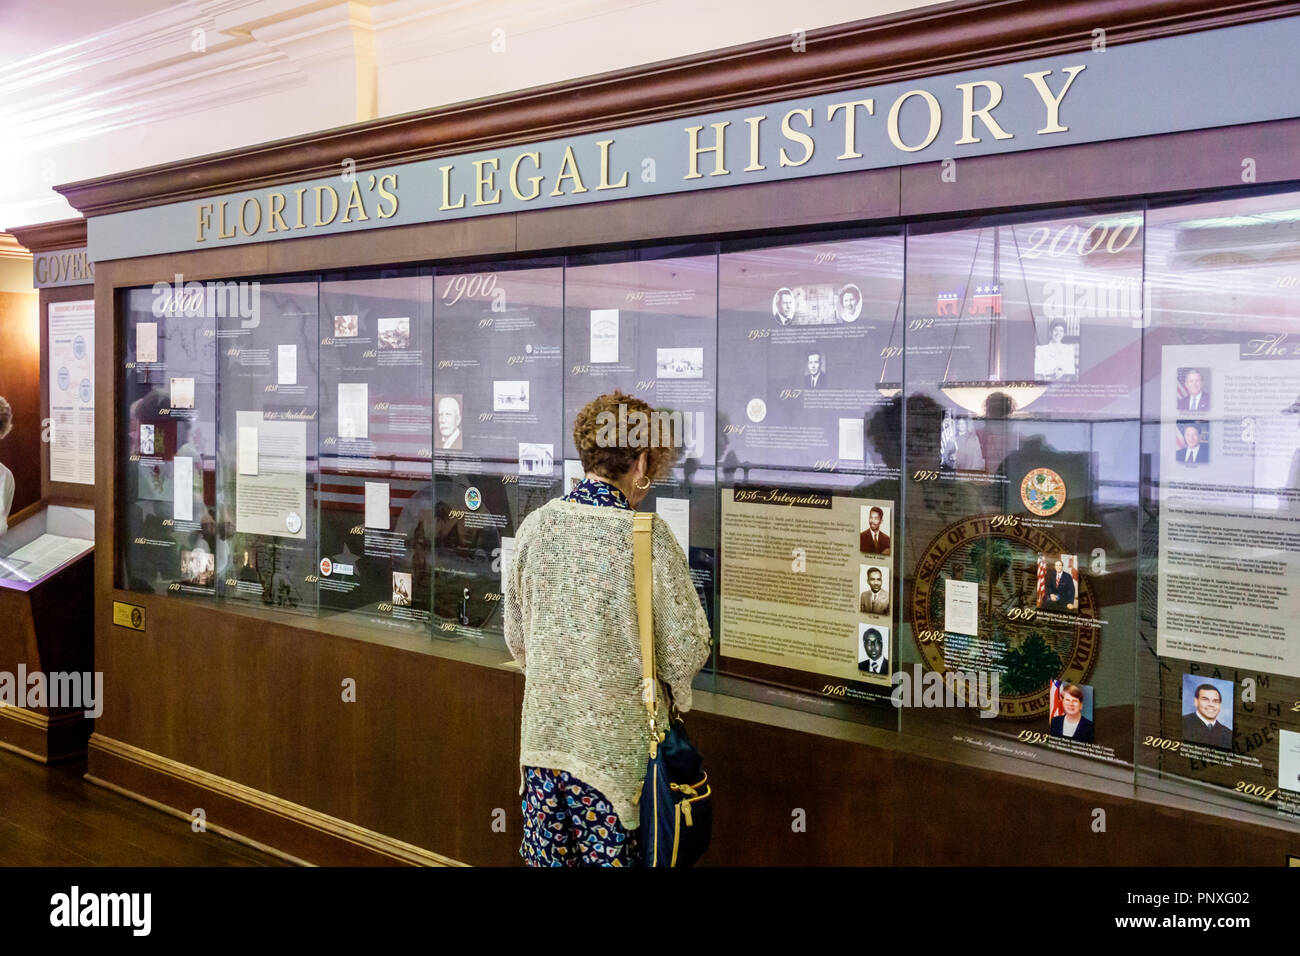 West Palm Beach Florida,Palm Beach County History Museum,1916 County Court House,historic,inside interior,legal exhibit,FL180212089 Stock Photo